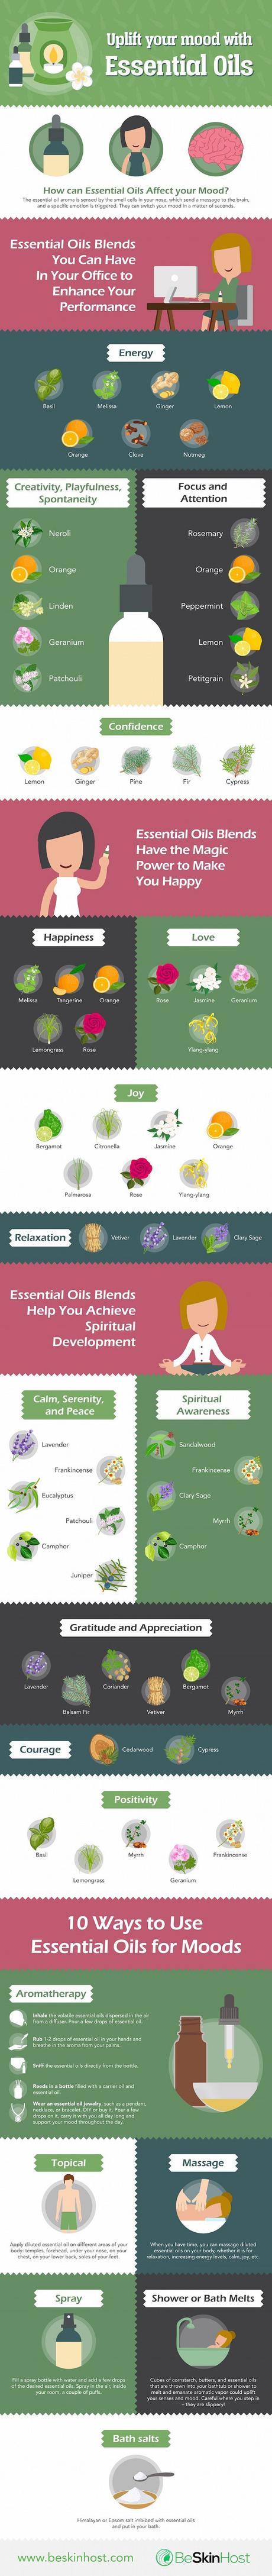 Aromatherapy Infographic: 10 Ways to Use 13 Essential Oil Recipes to Uplift Your Mood